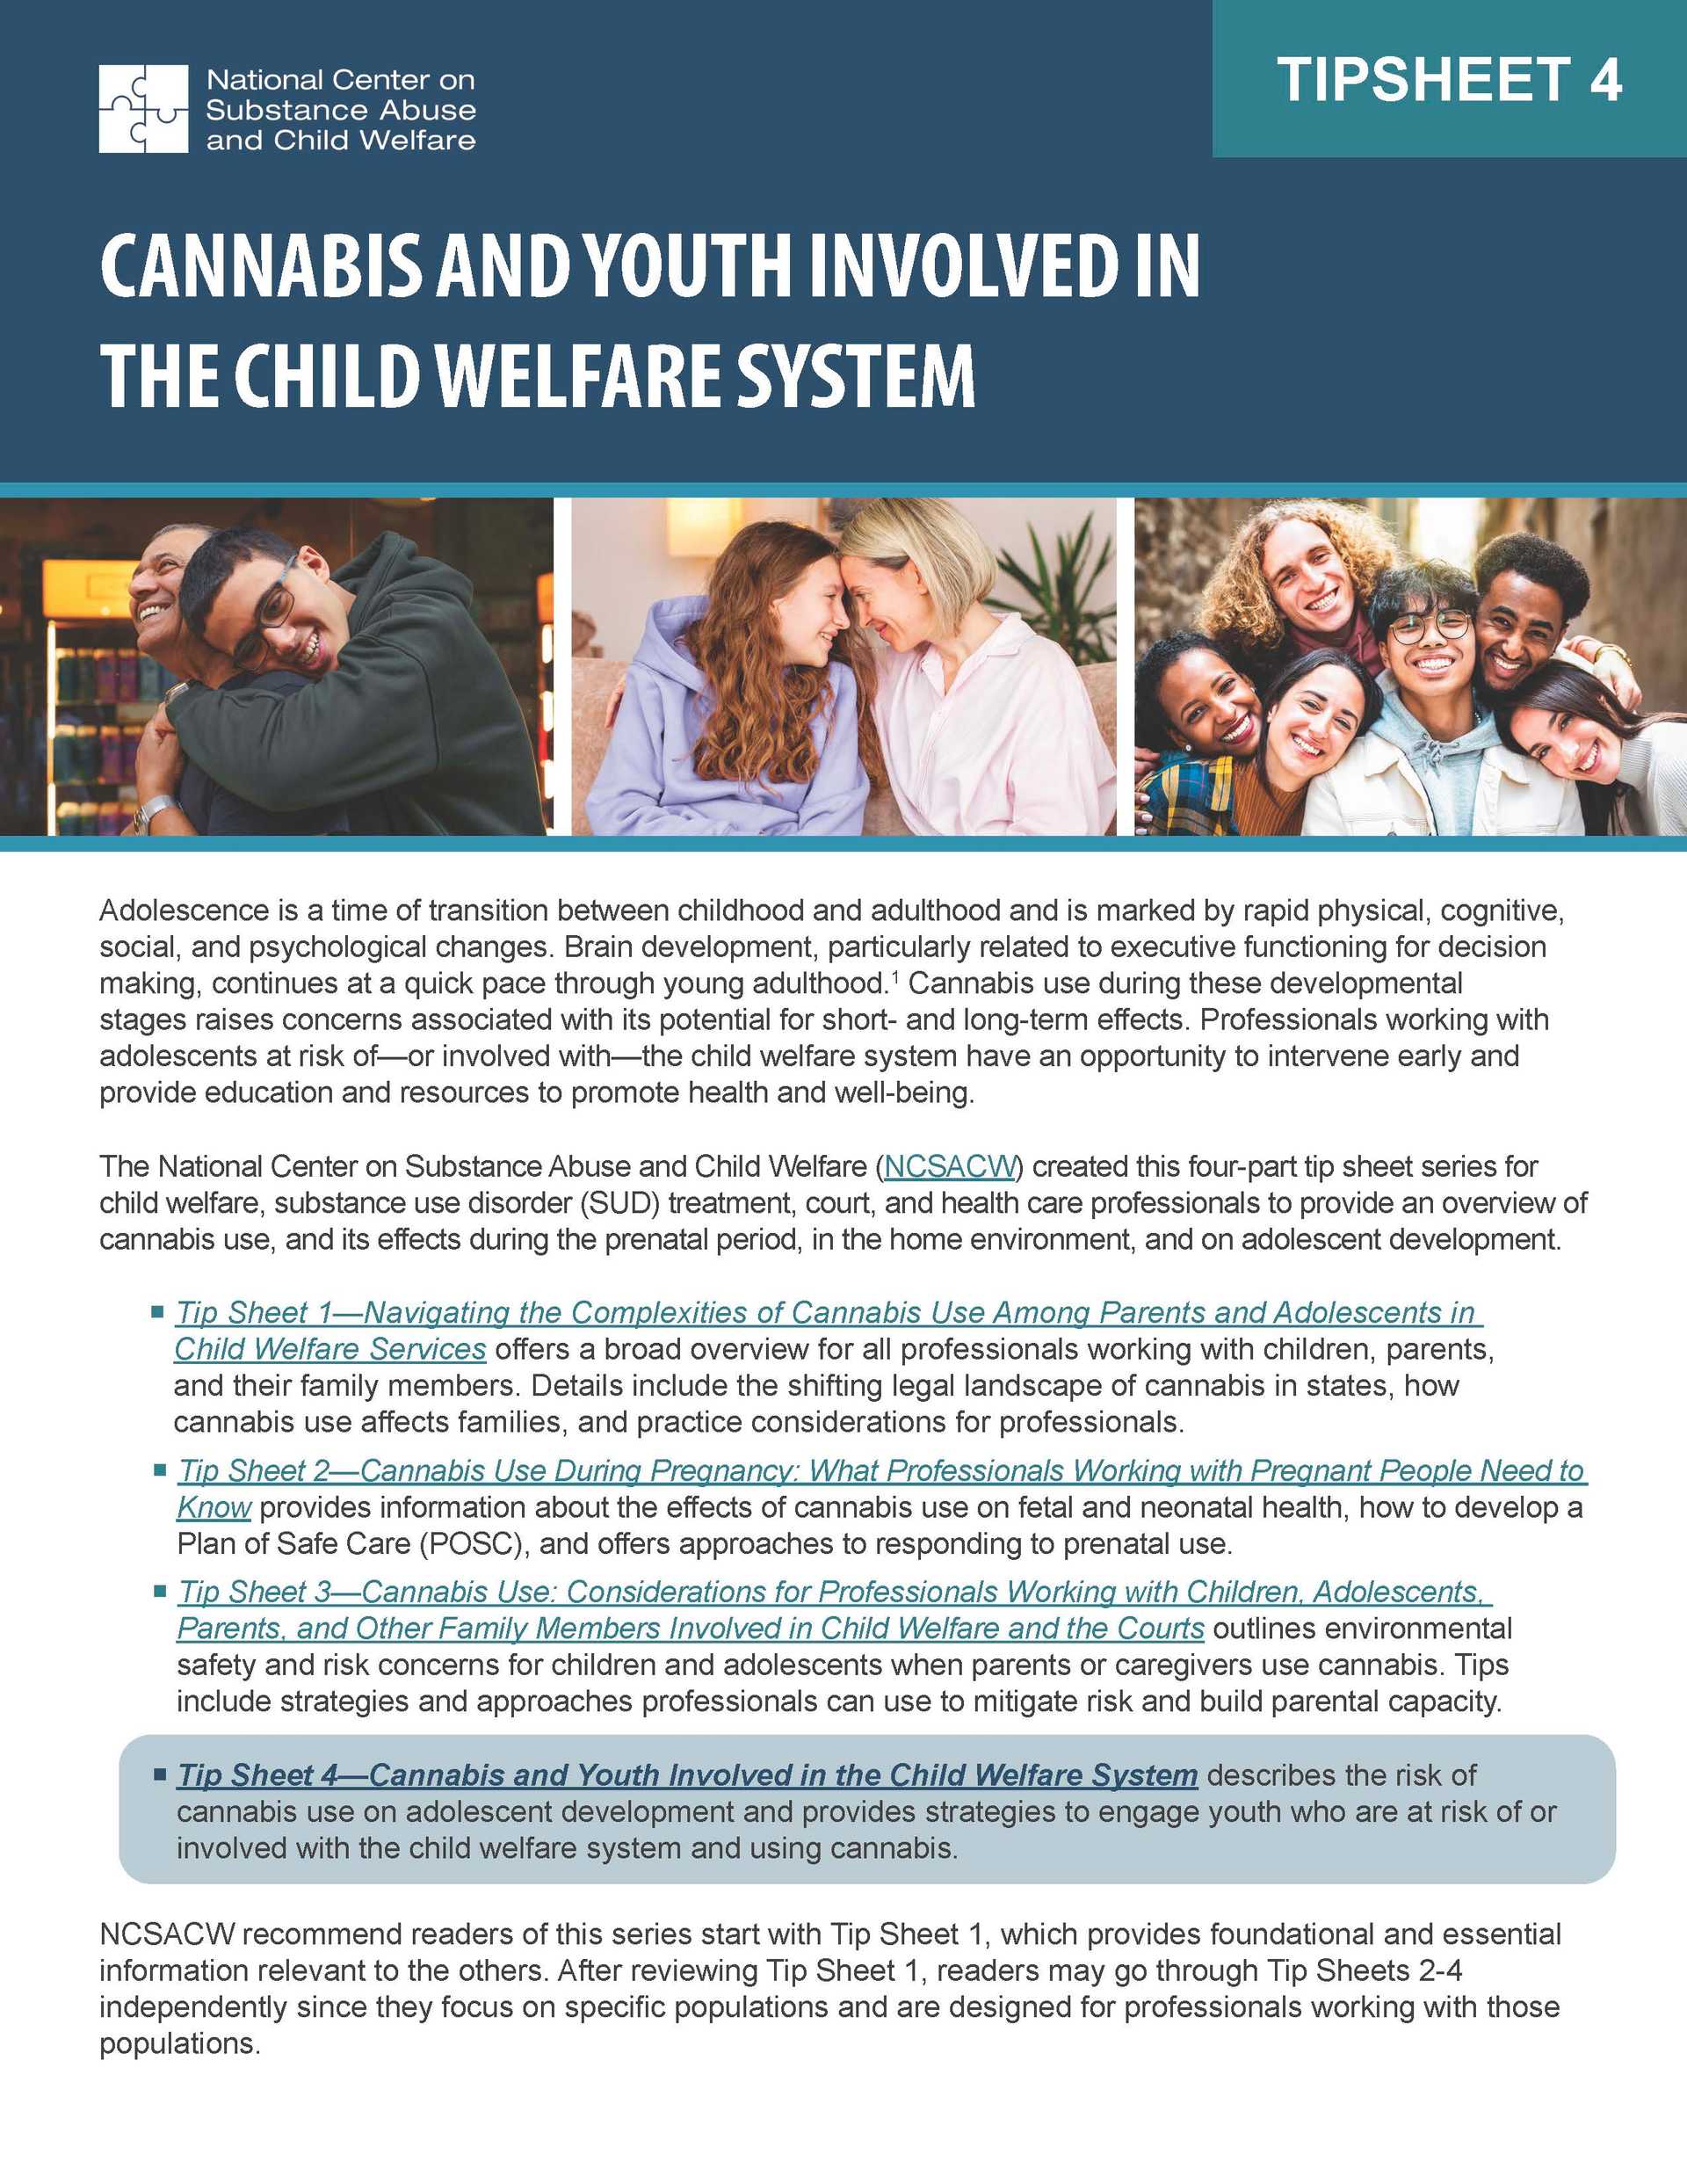 Tip Sheet 4: Cannabis and Youth Involved in the Child Welfare System